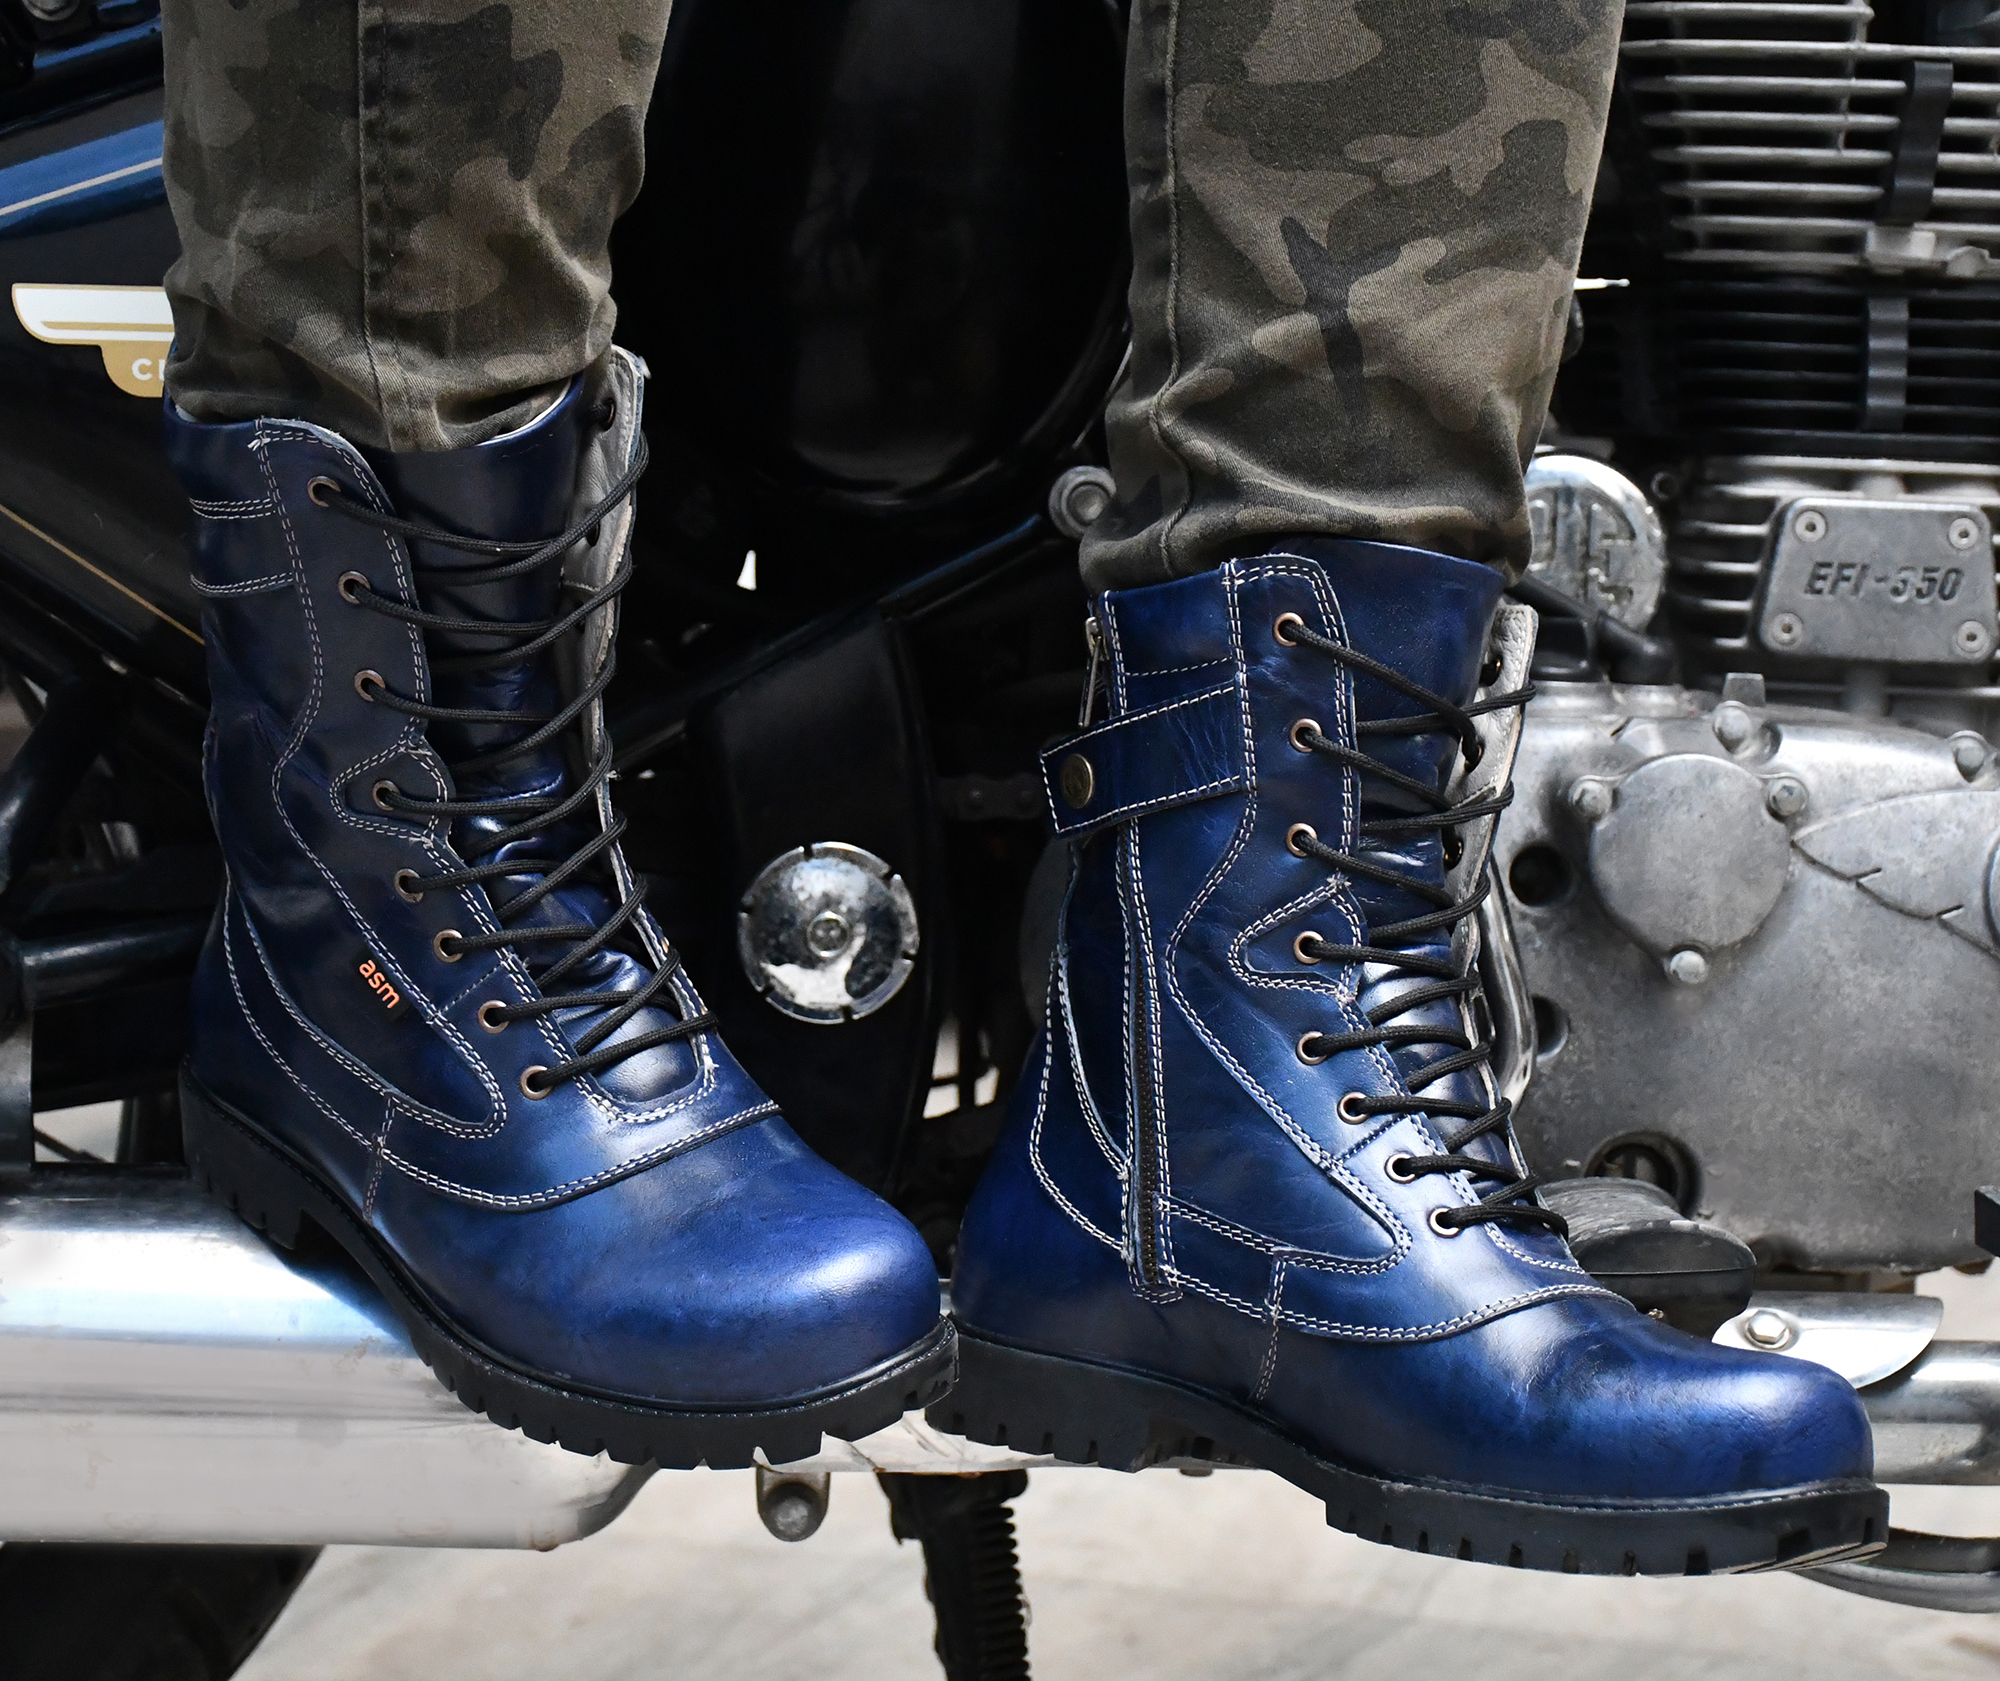 Biker Boots : Side-Zip Blue Rugged Leather 9 Inches long leather Boots. Article-703Blue